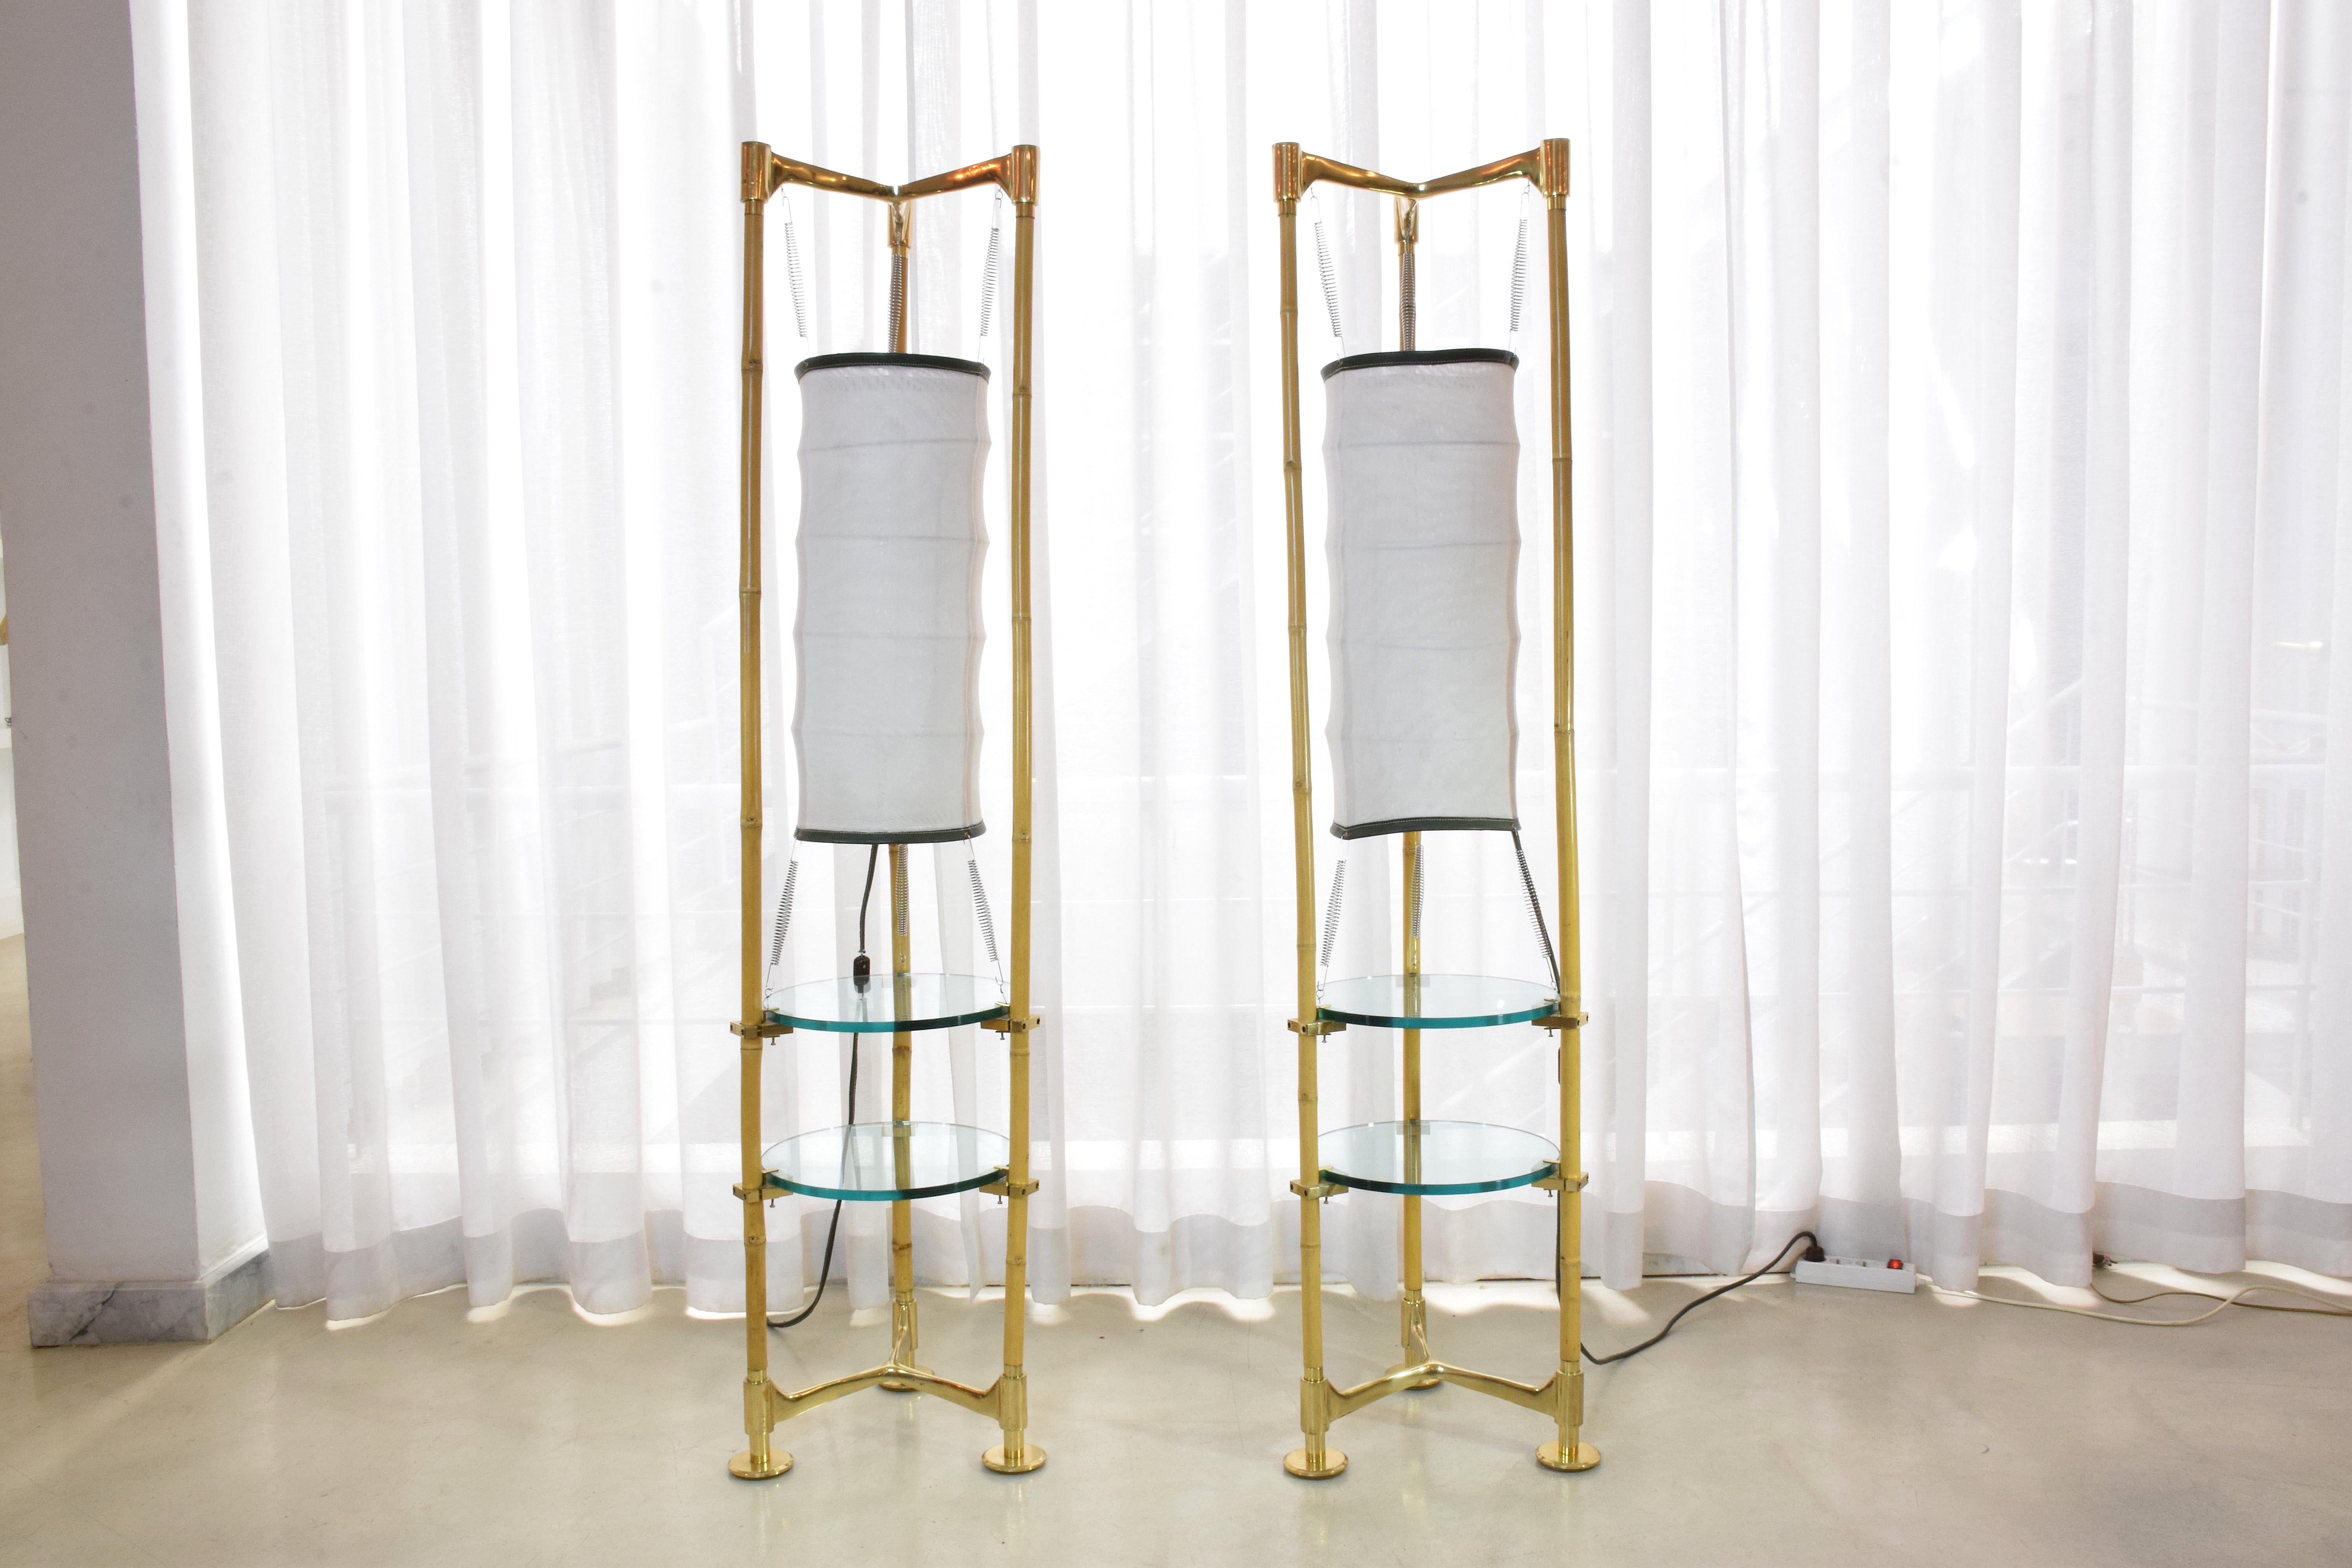 A gorgeous pair of 20th-century Italian vintage floor lamps with integrated side tables from the 1970s designed in bamboo and brass. The design is highlighted by the stylish tripod structures and Asian lantern style fabric shades with black leather